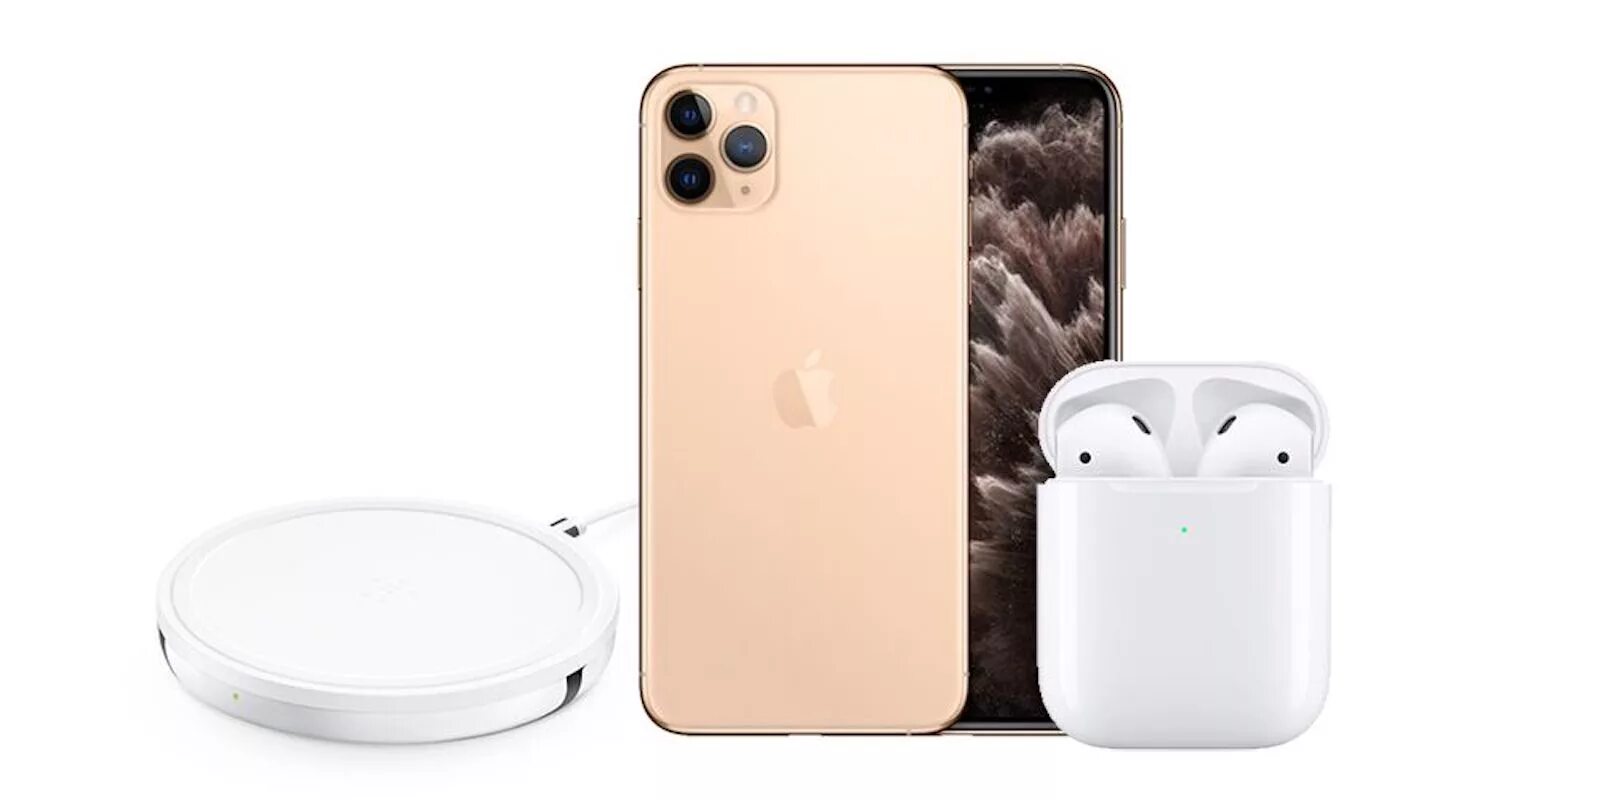 Iphone AIRPODS Pro Max. Iphone 11 Pro и AIRPODS Pro. Iphone 13 Pro Max AIRPODS. Iphone 11 AIRPODS.